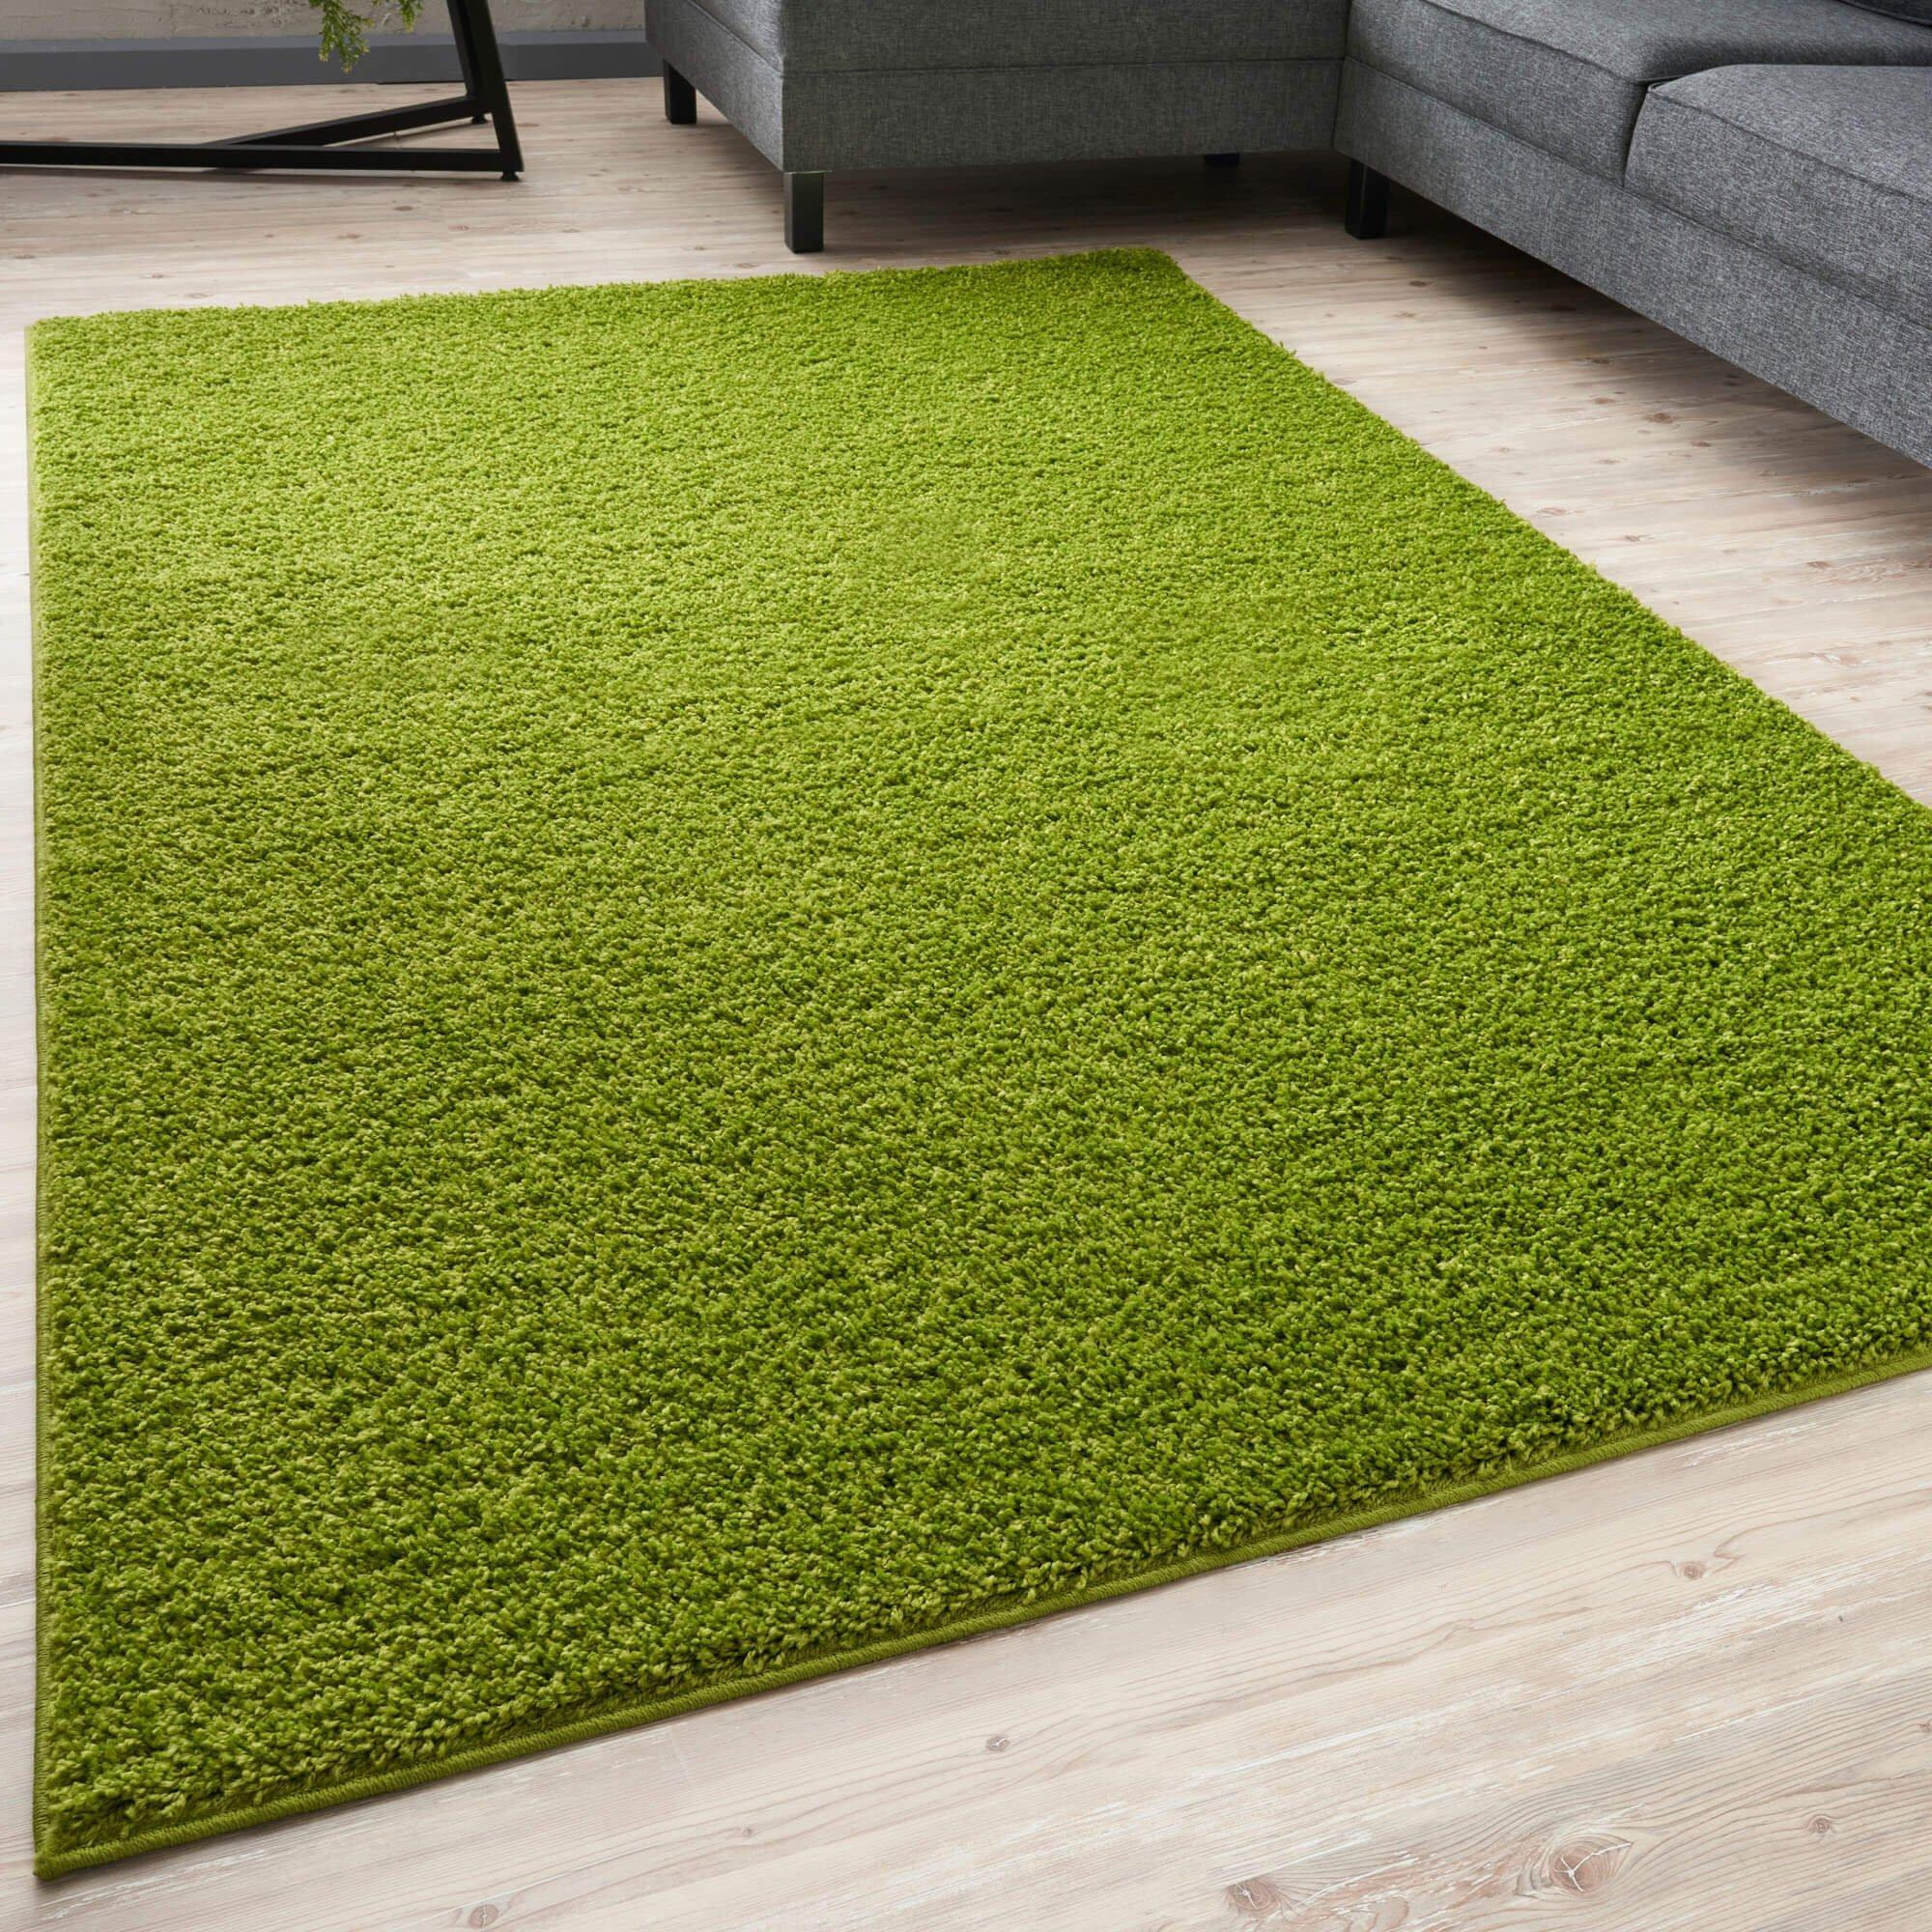 Myshaggy Collection Rugs Solid Design in Green - image 1